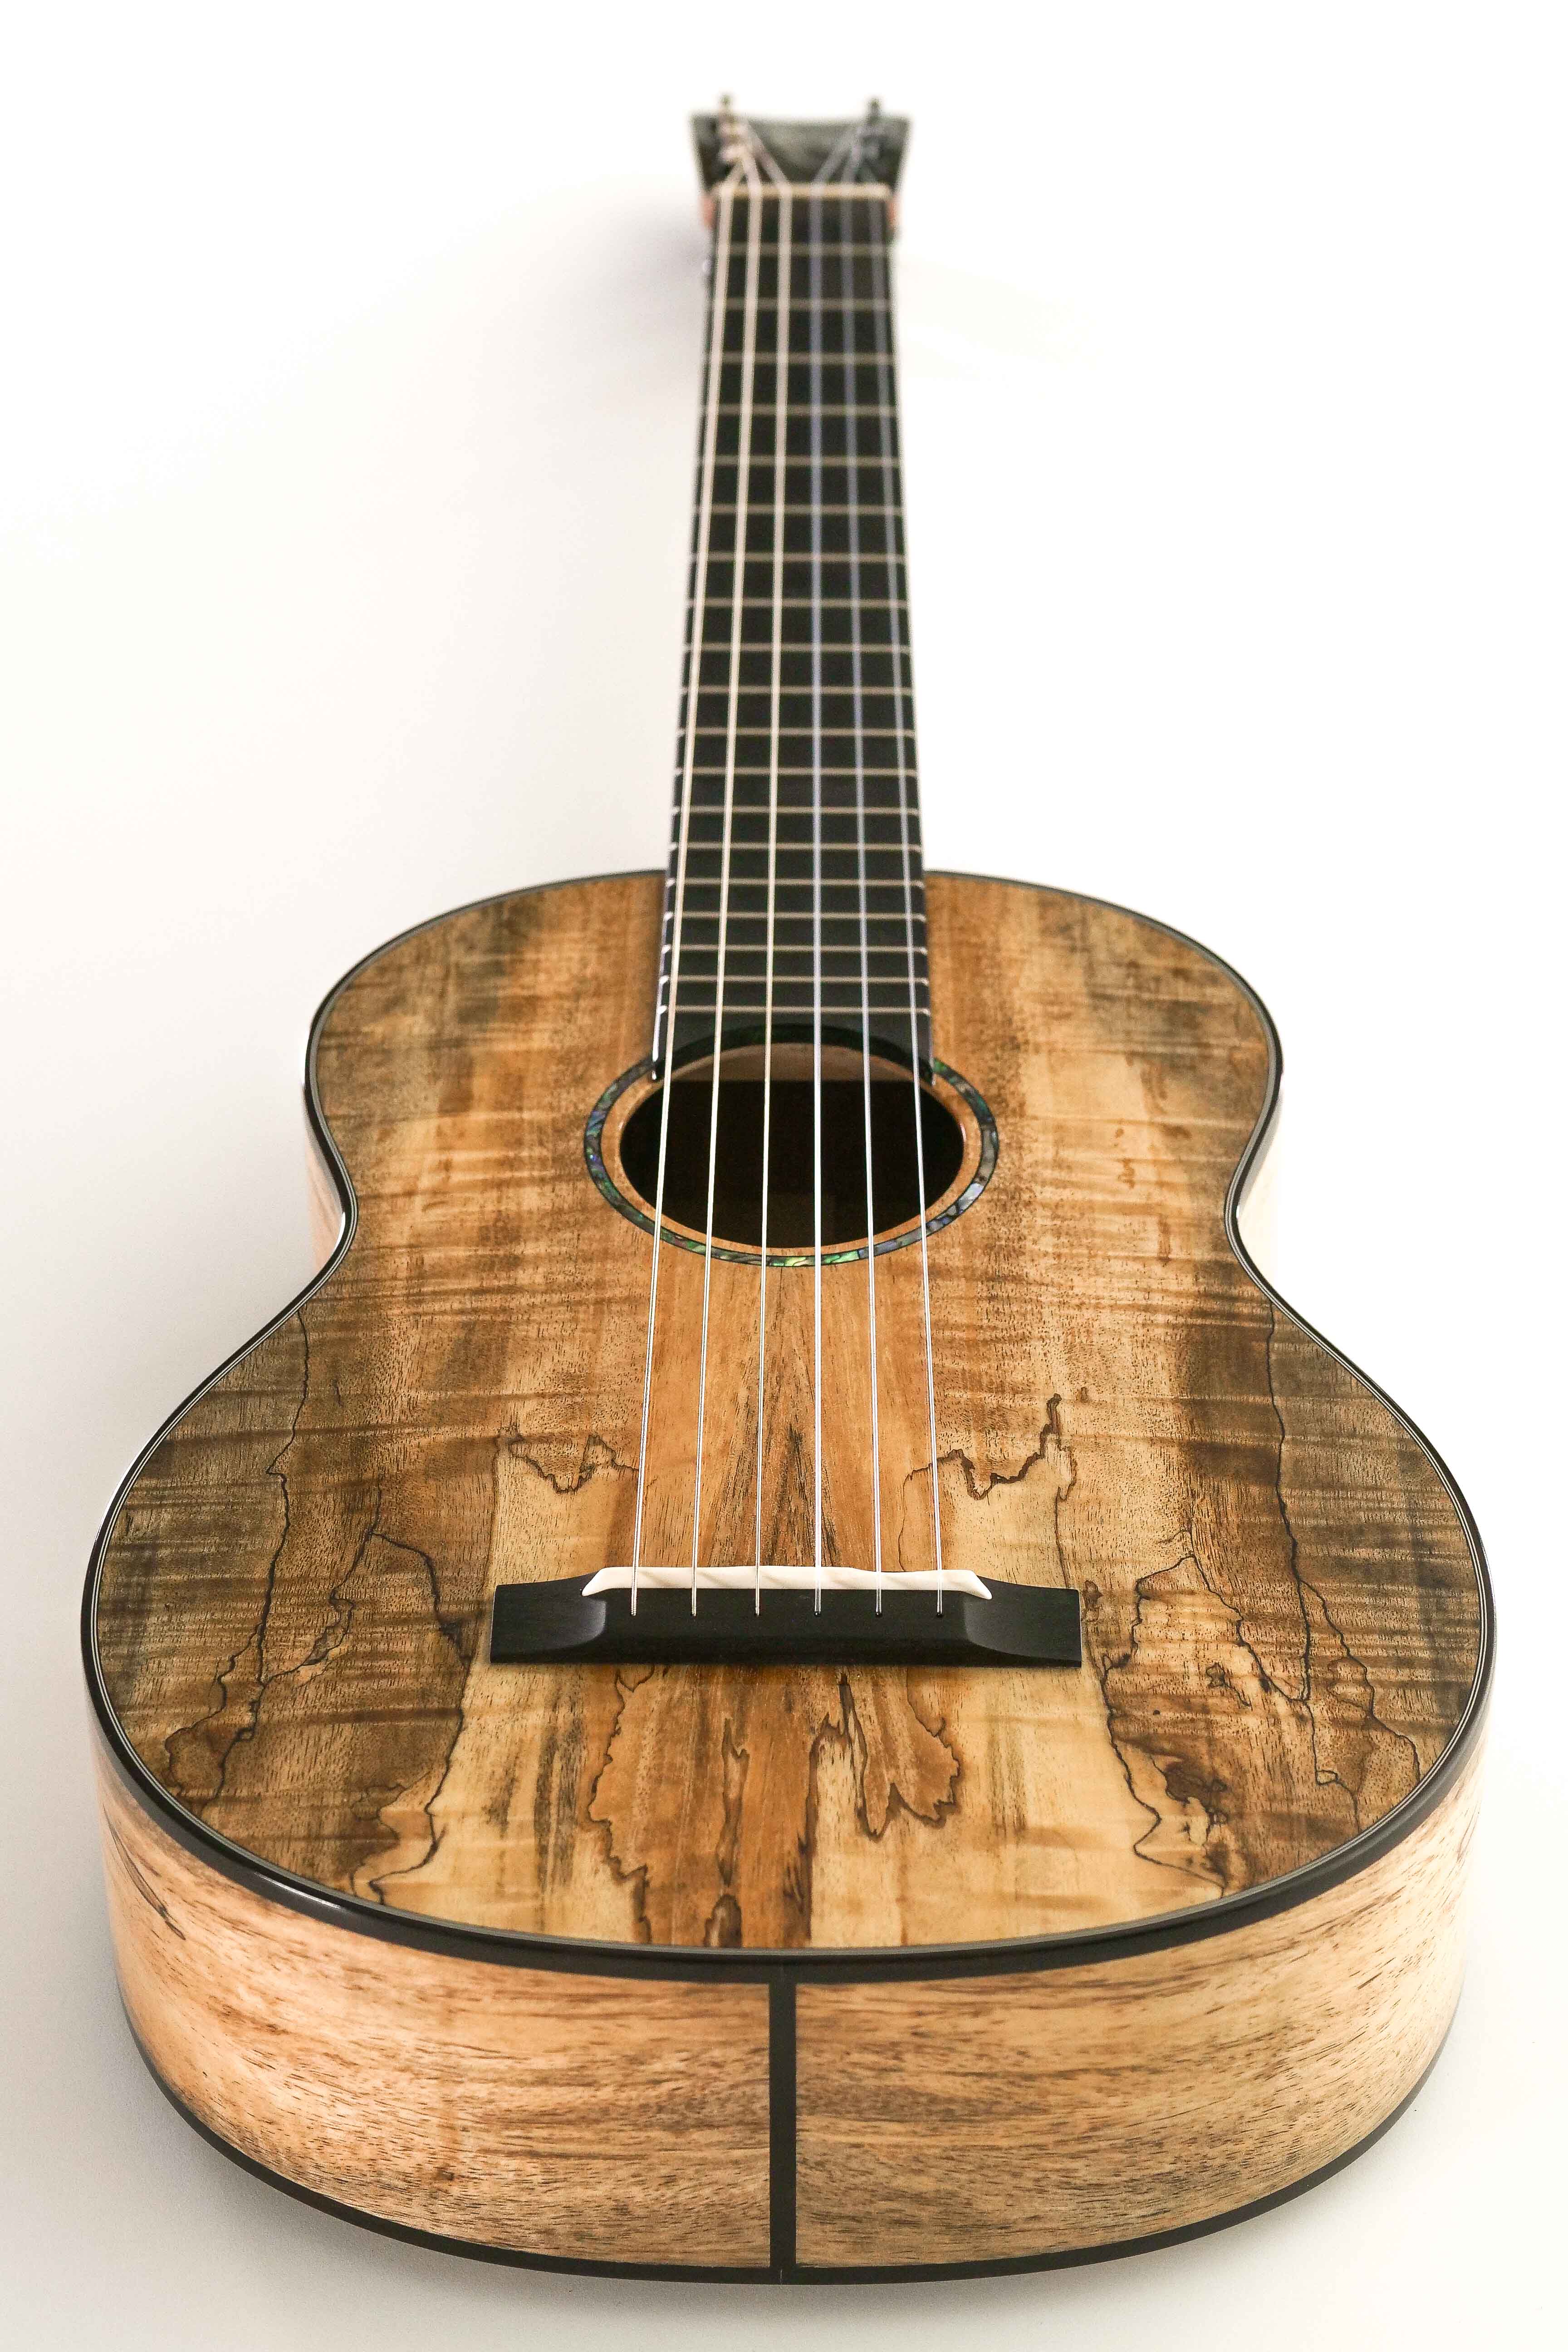 Romero Creations RC-P6-MG Parlor Guitar Spalted Mango "MONA" LIMITED EDITION